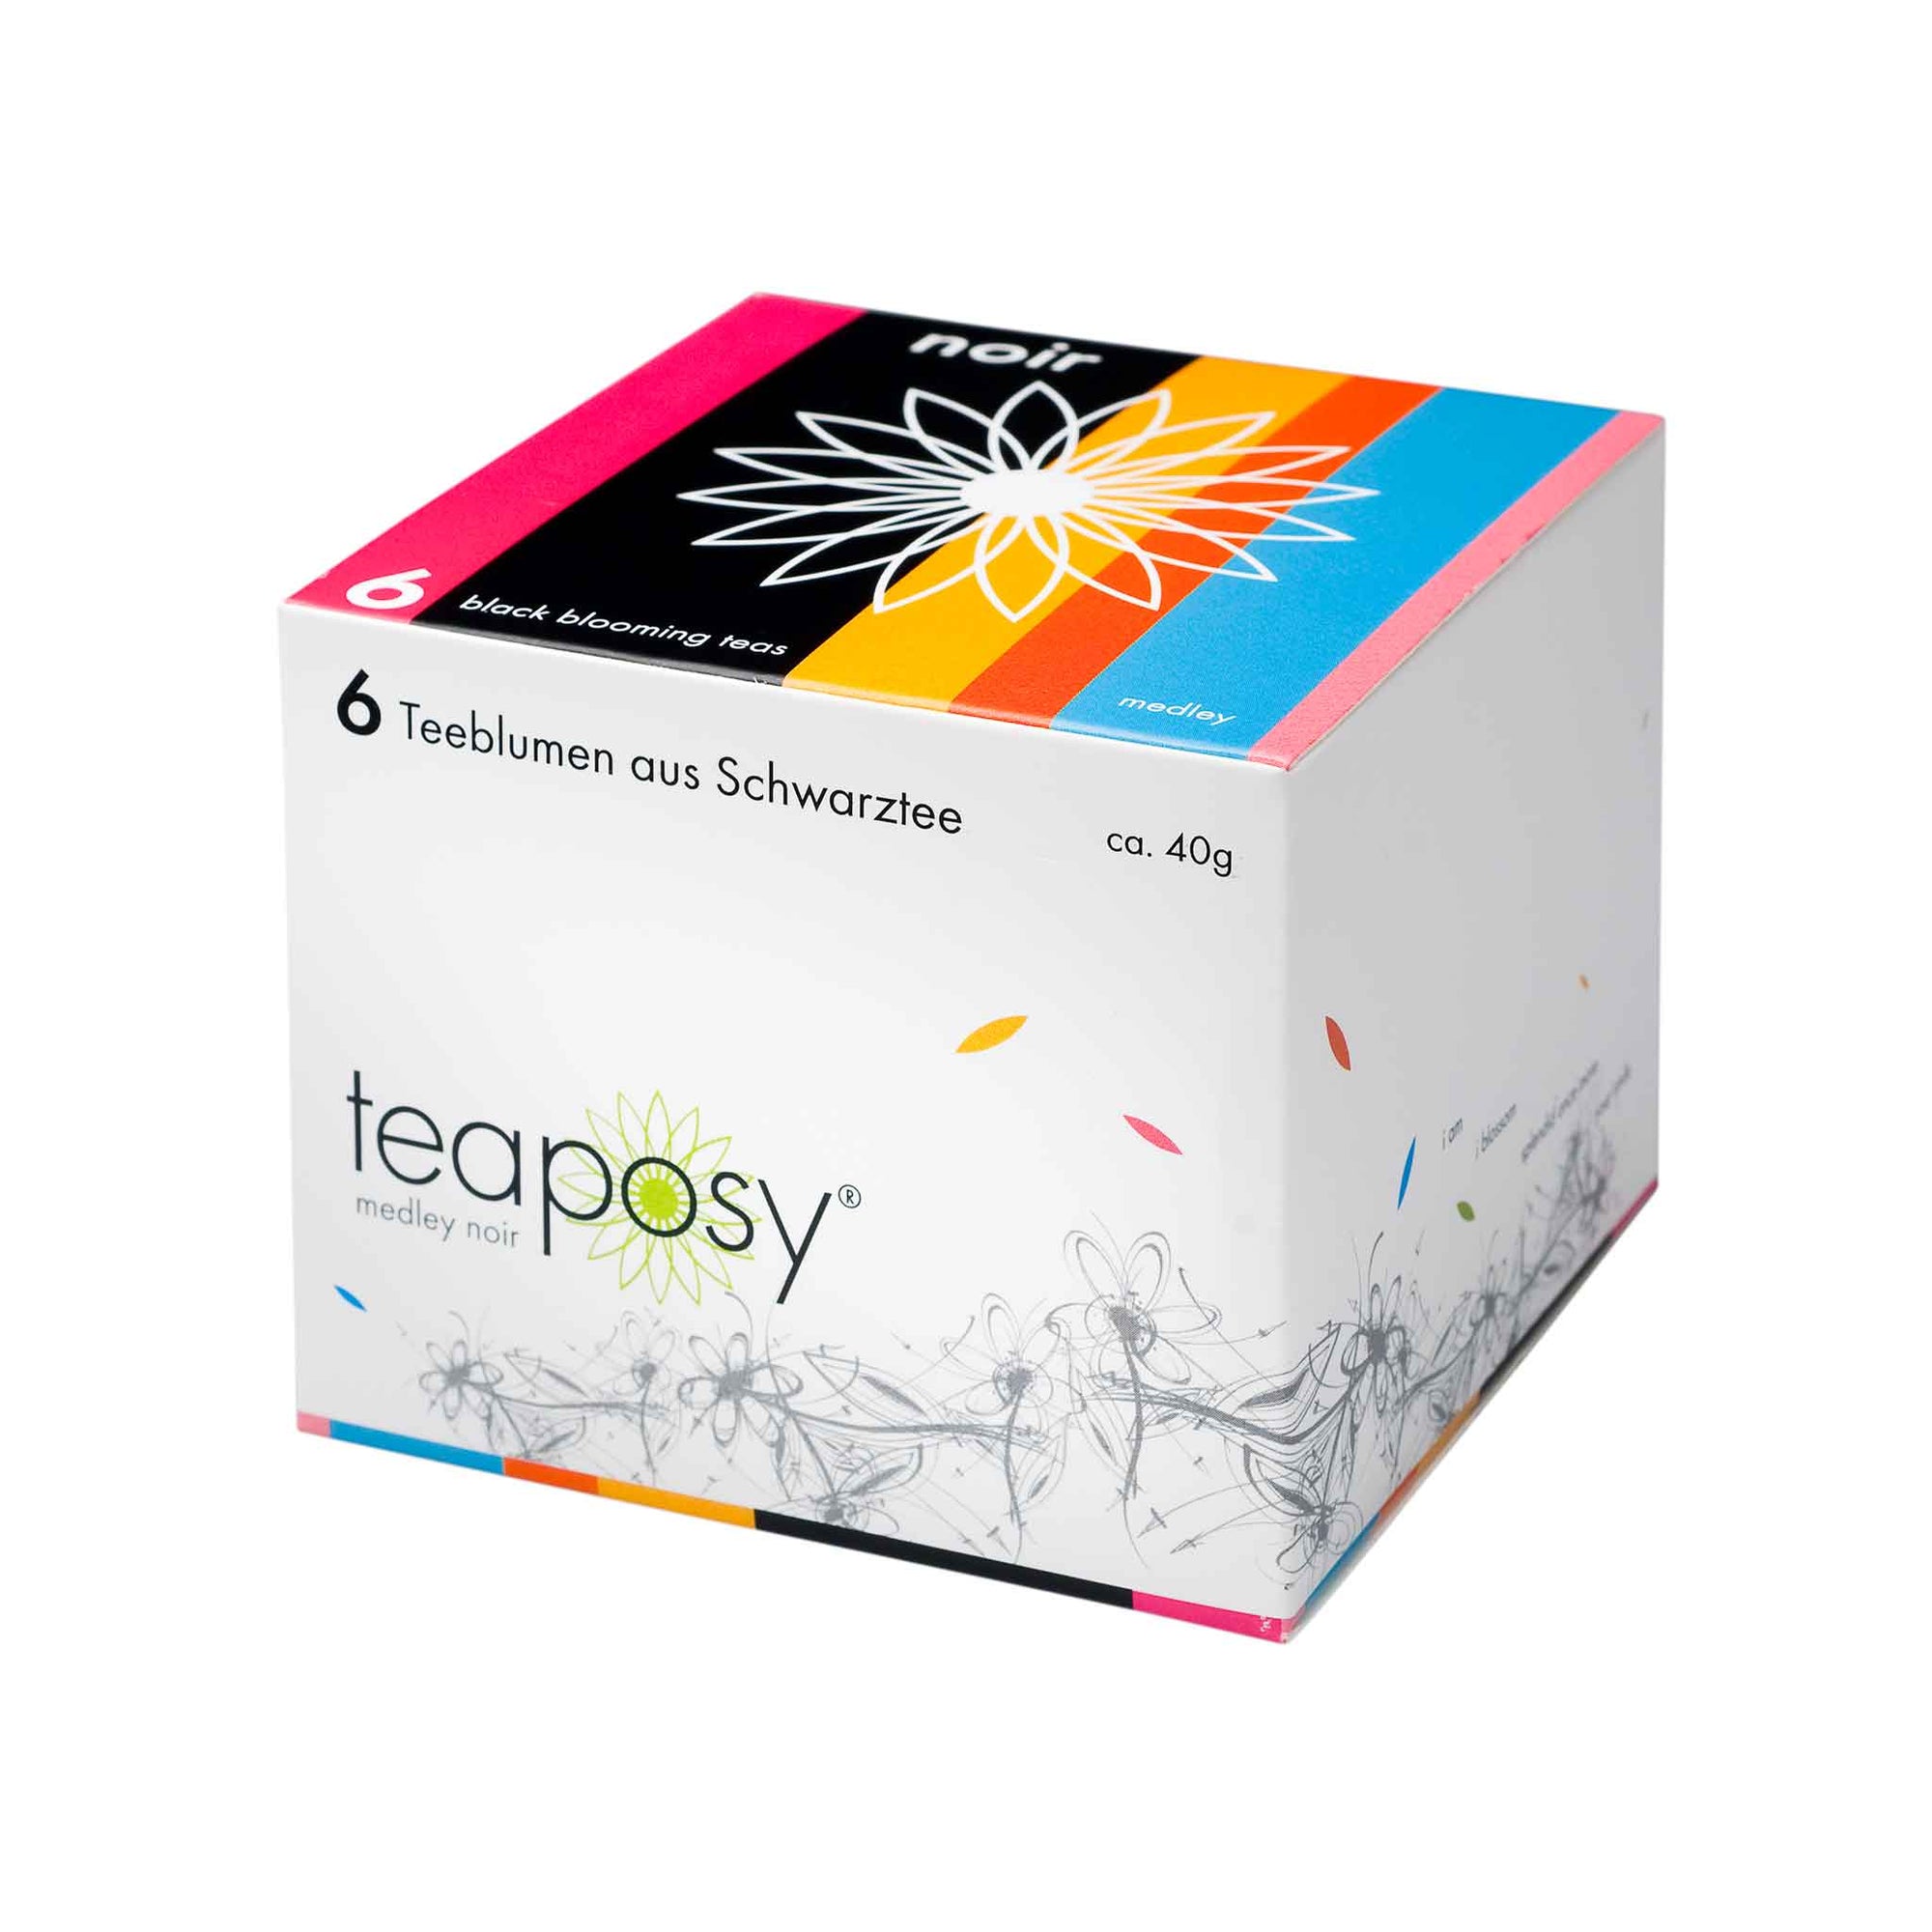 Teaposy medley noir with 6 unique blooming teas made with silver needle black teas, packed in a colorful box